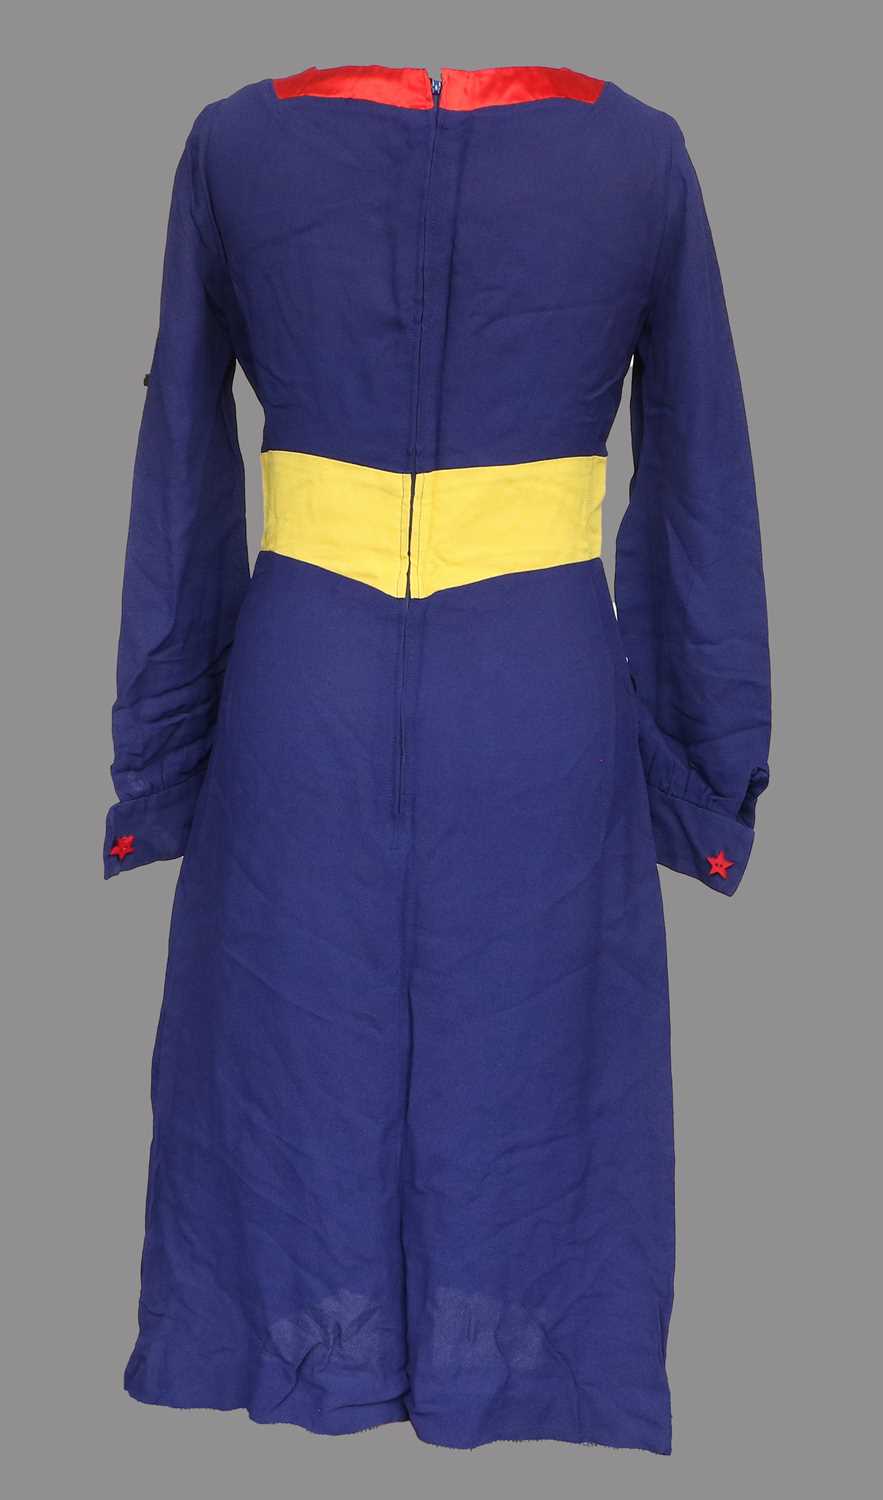 Circa 1960s Wallis Fashion Shops Dress, in blue crepe type fabric with red satin trimmed boat shaped - Image 3 of 9